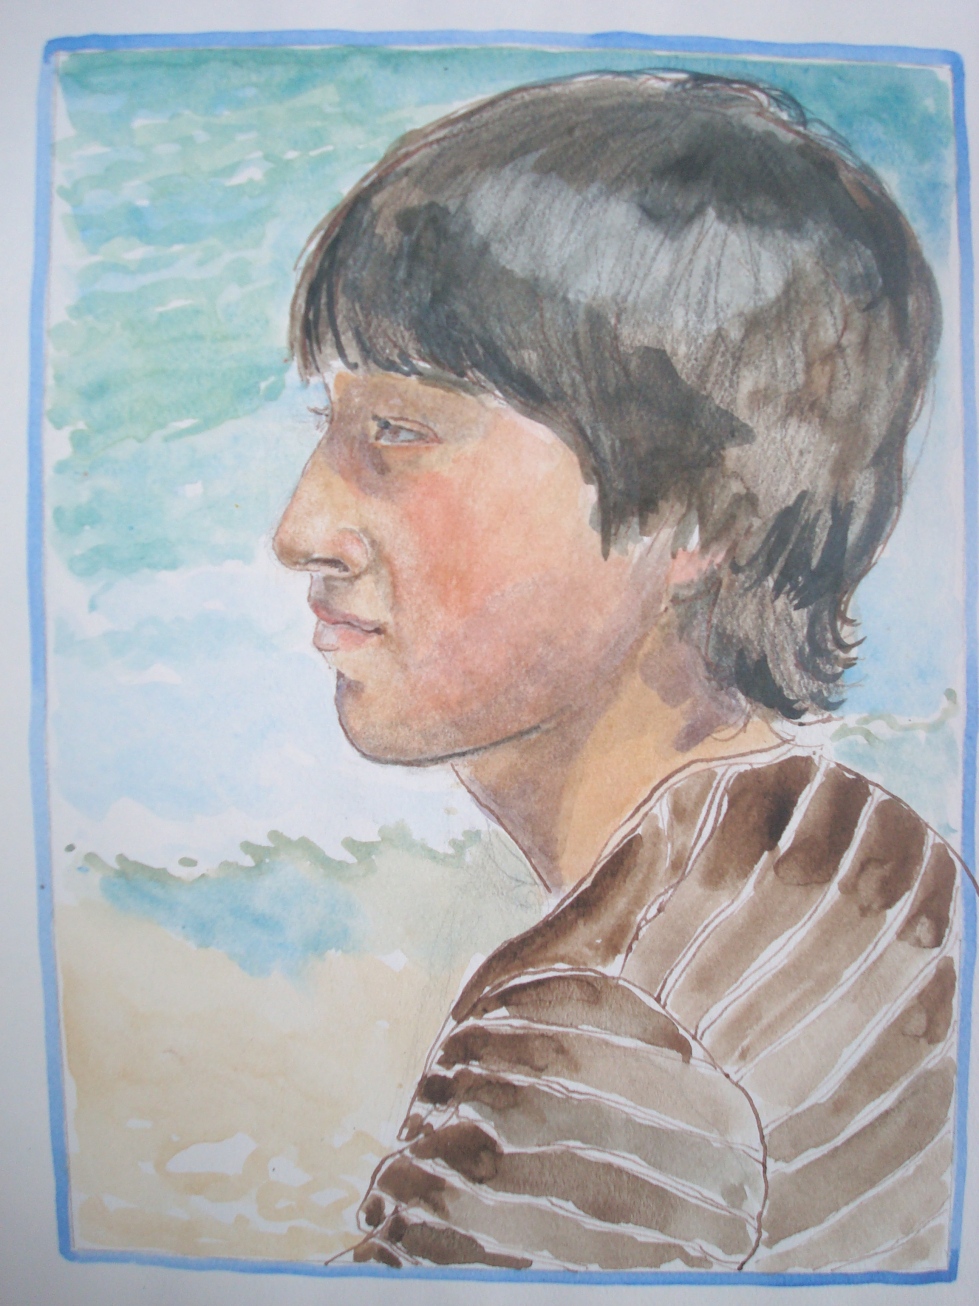 A boy looking out to sea